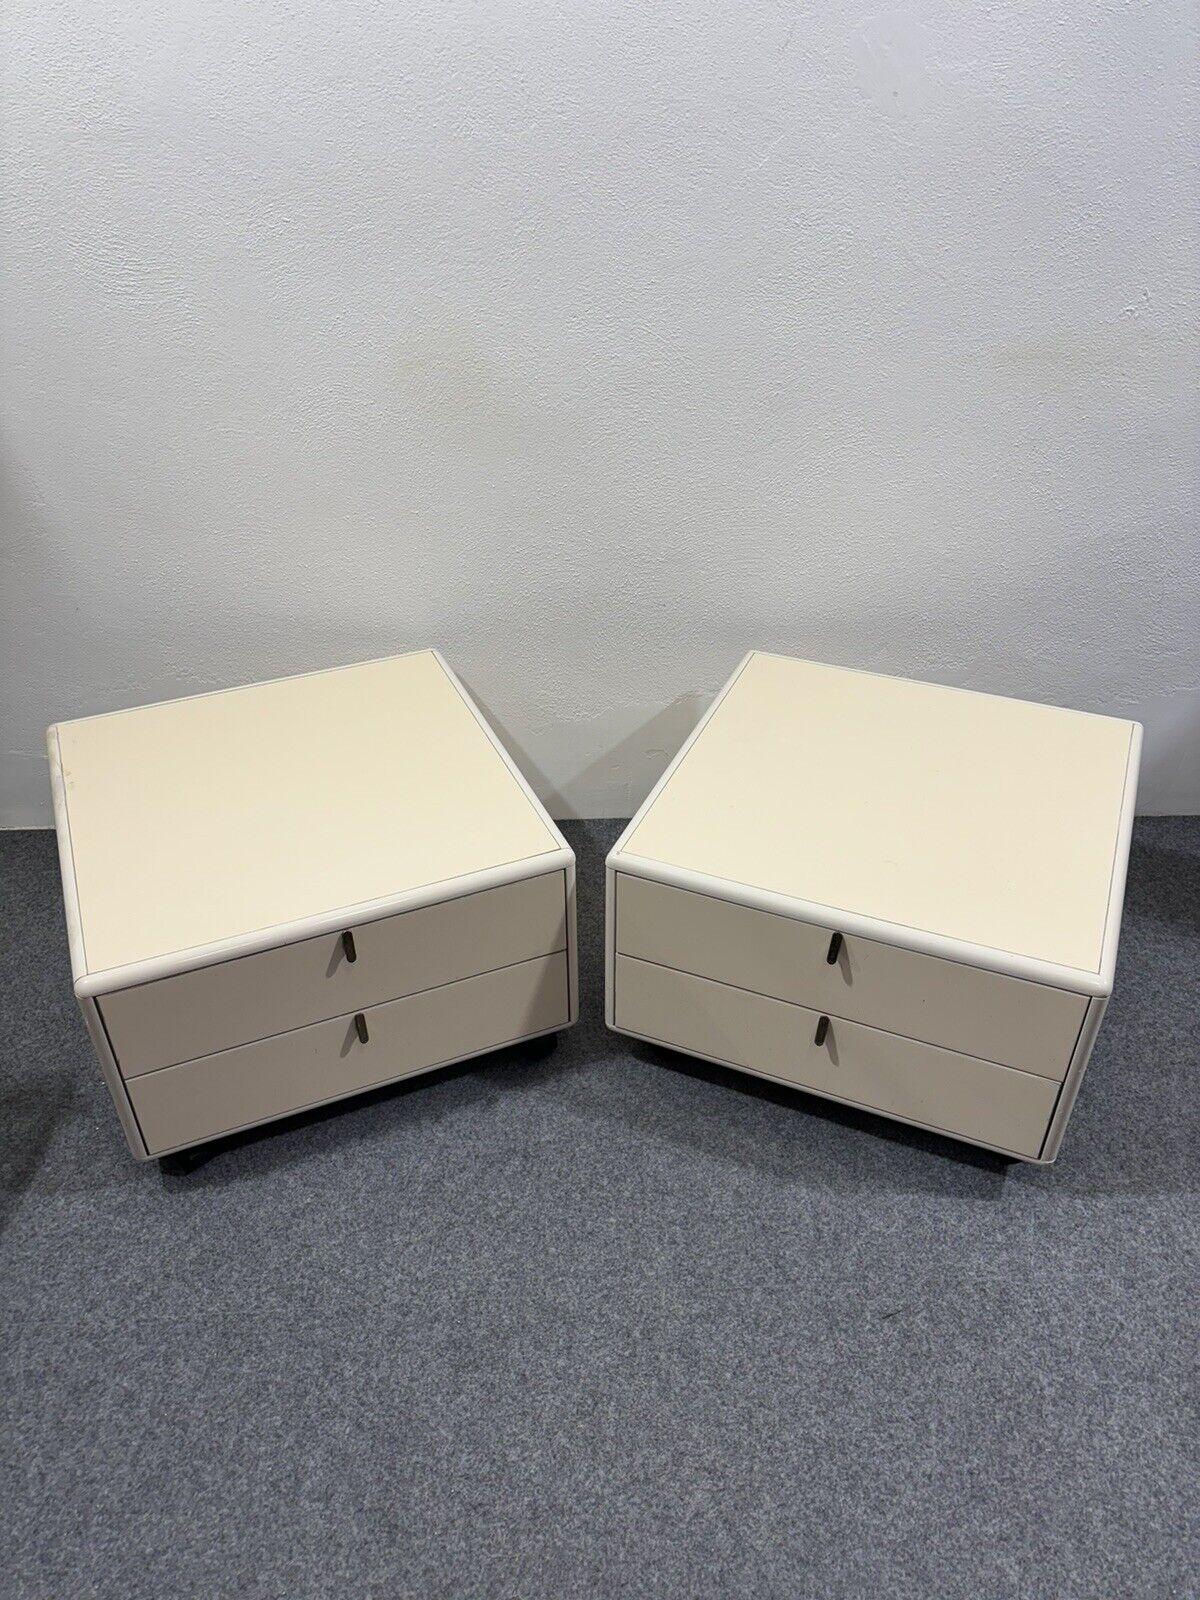 Late 20th Century George Coslin Pair Of Longato Henna Nightstands 1970s Modern Design For Sale